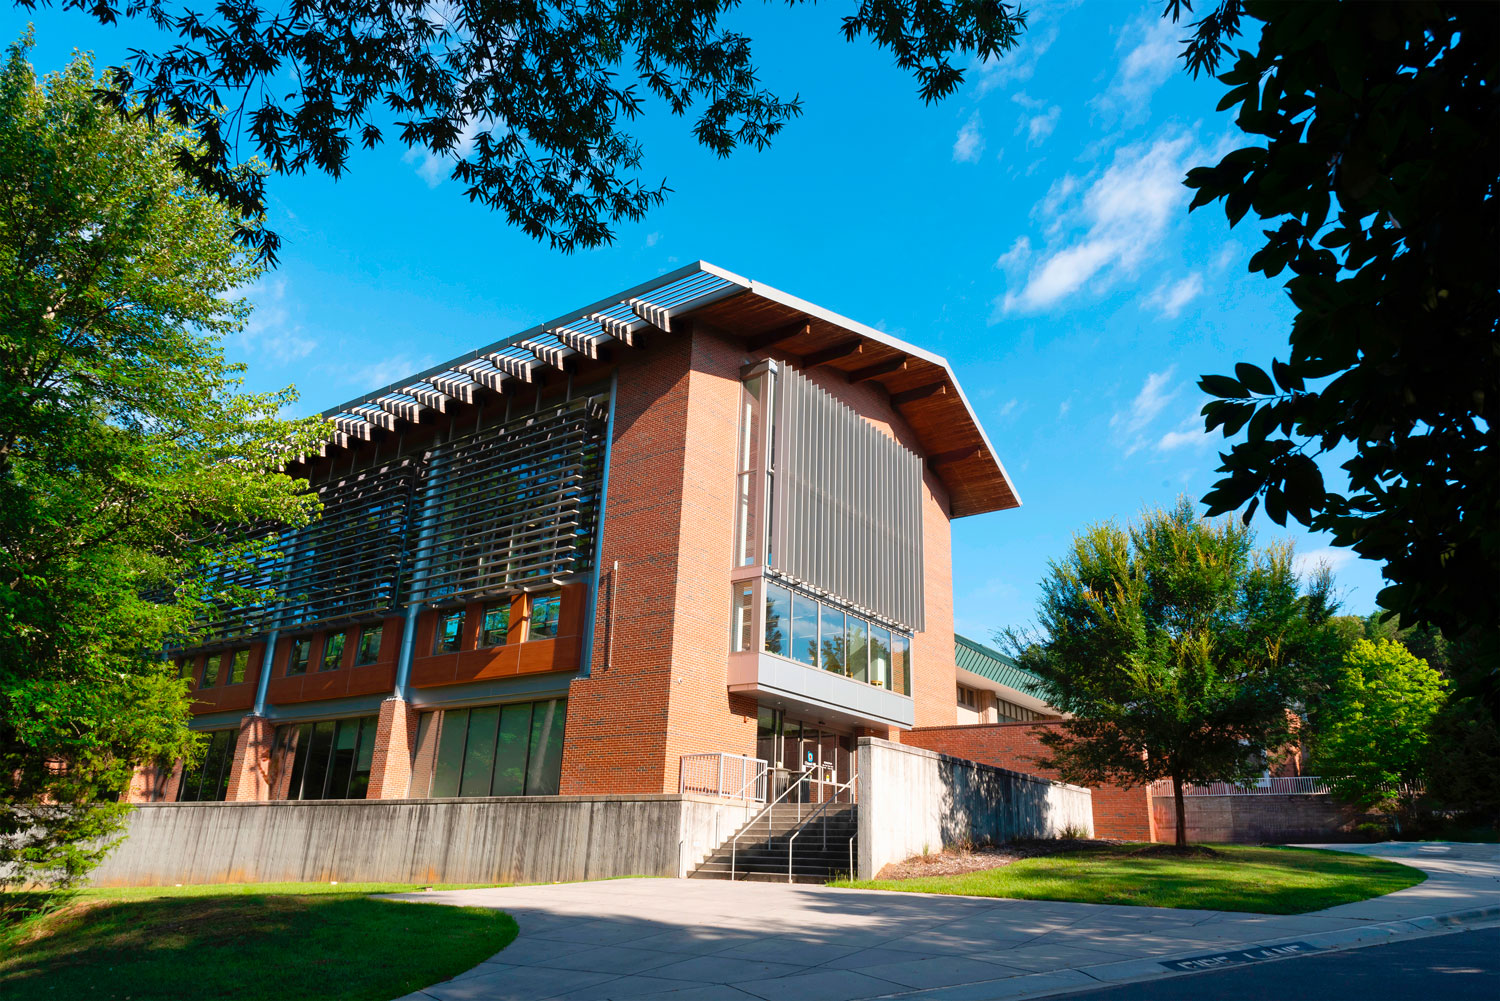 Chapel Hill Public Library in North Carolina is more than just a book repository, it is a hub of activity for the town’s residents and the surrounding communities.